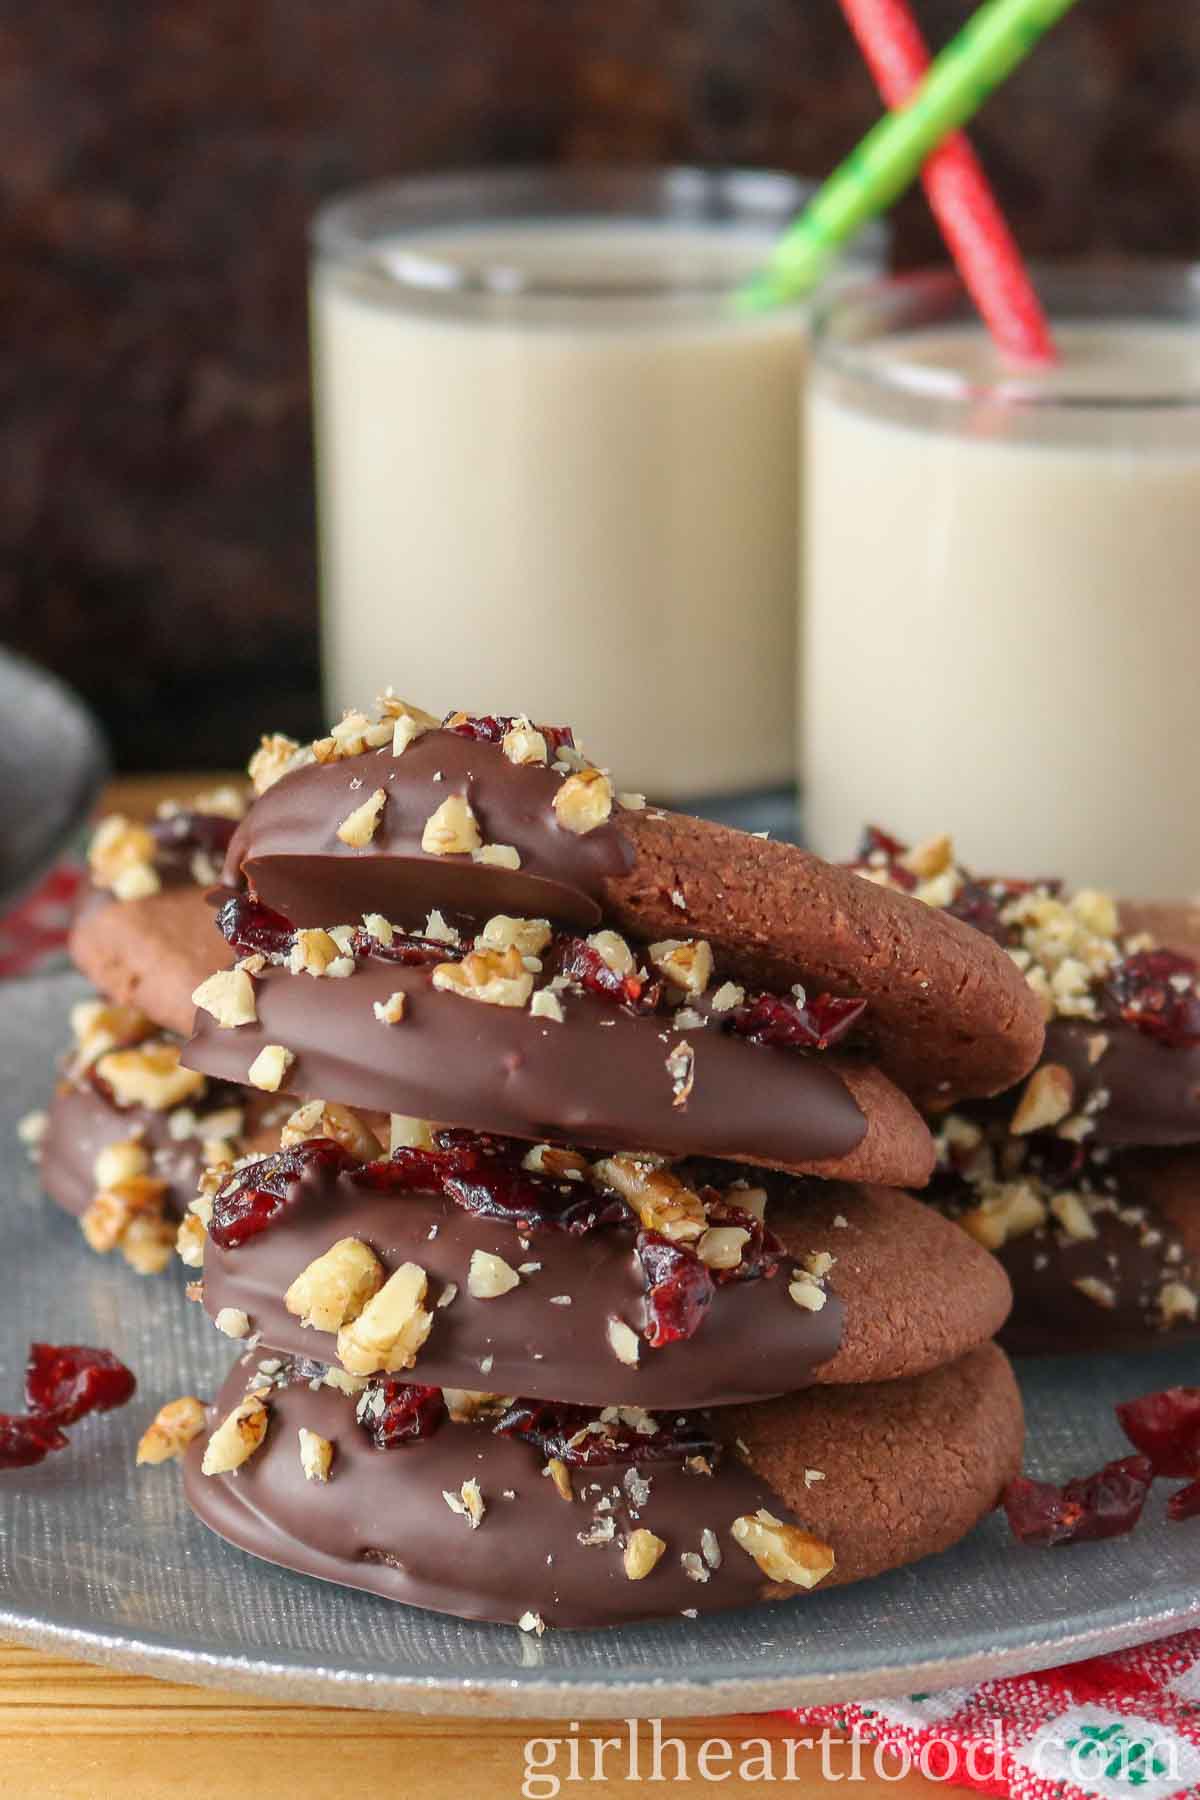 Stacks of chocolate shortbread cookies on a silver plate in front of two glasses of milk.